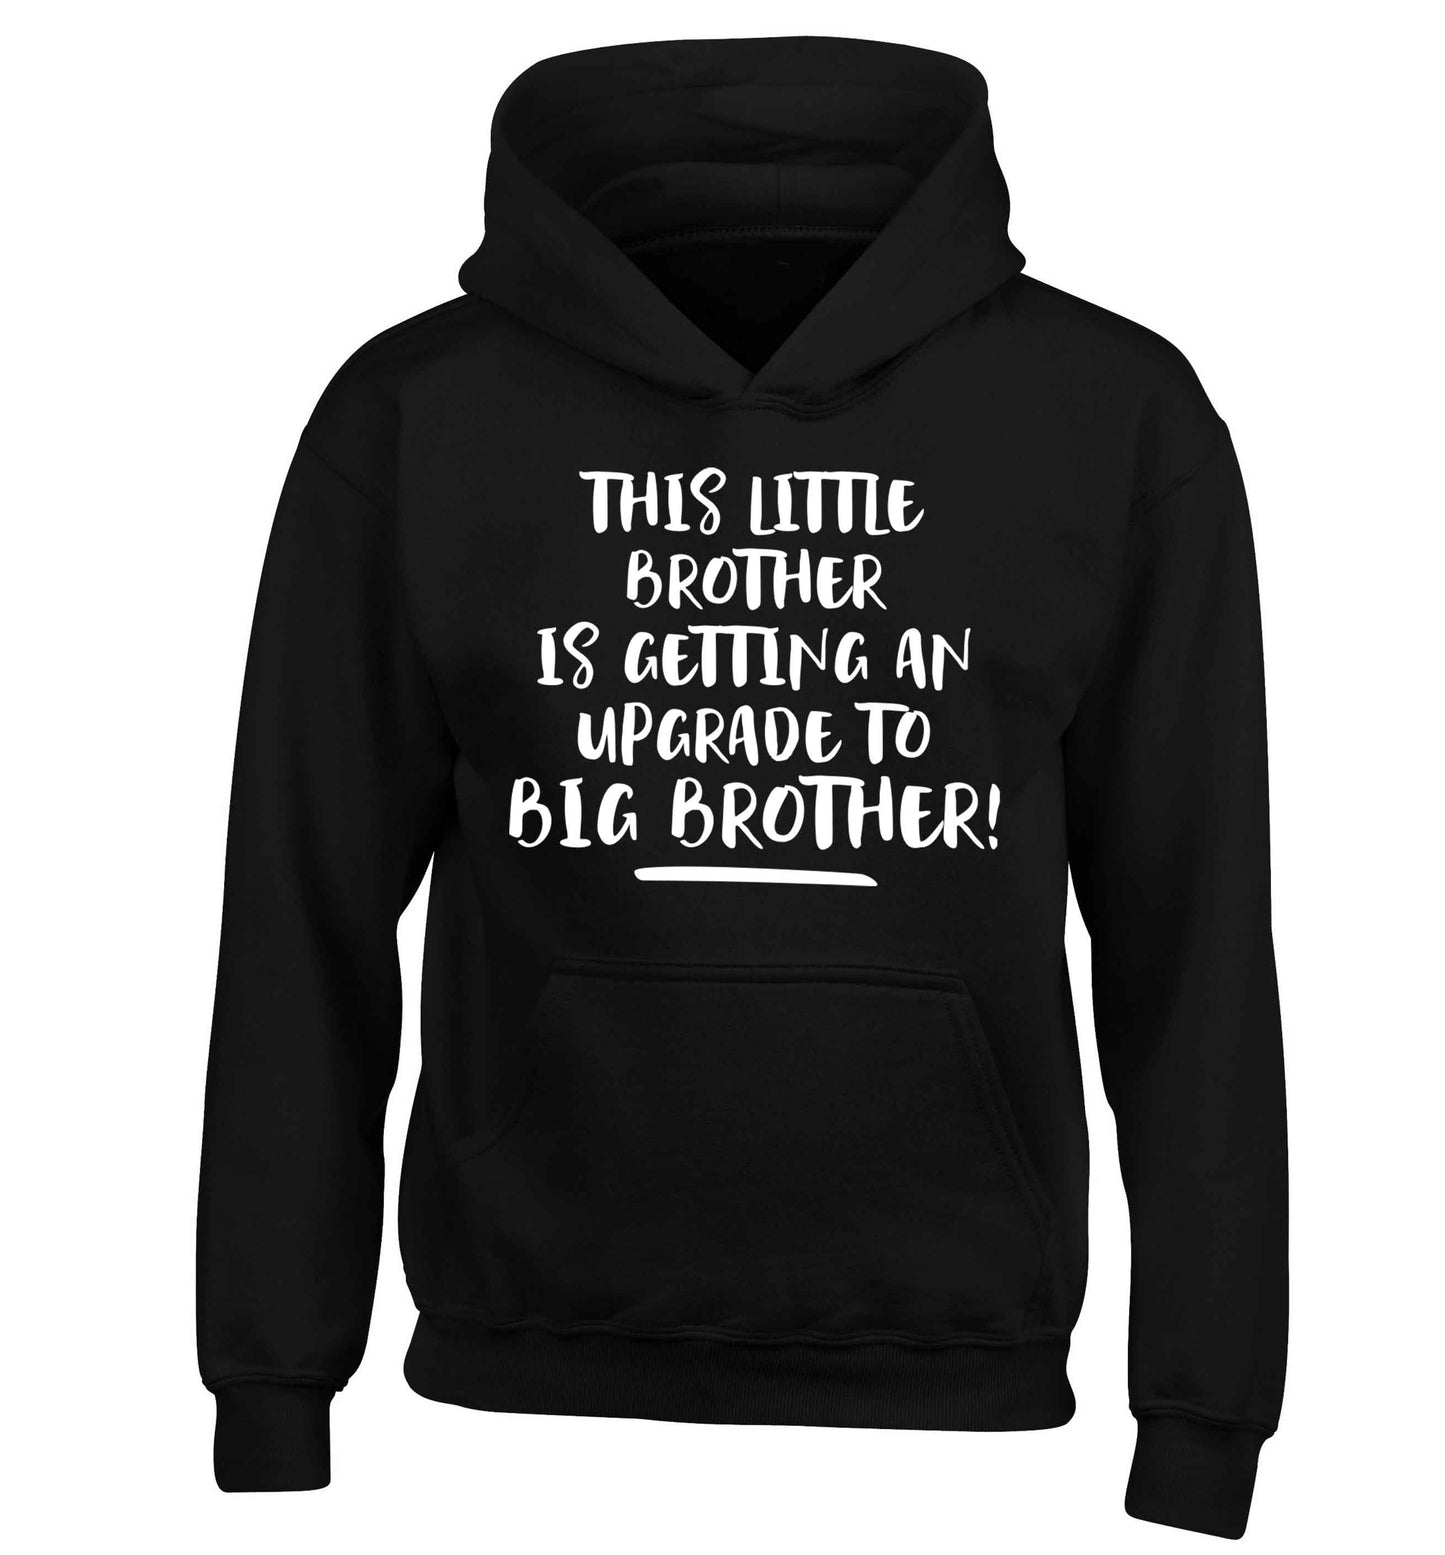 This little brother is getting an upgrade to big brother! children's black hoodie 12-13 Years